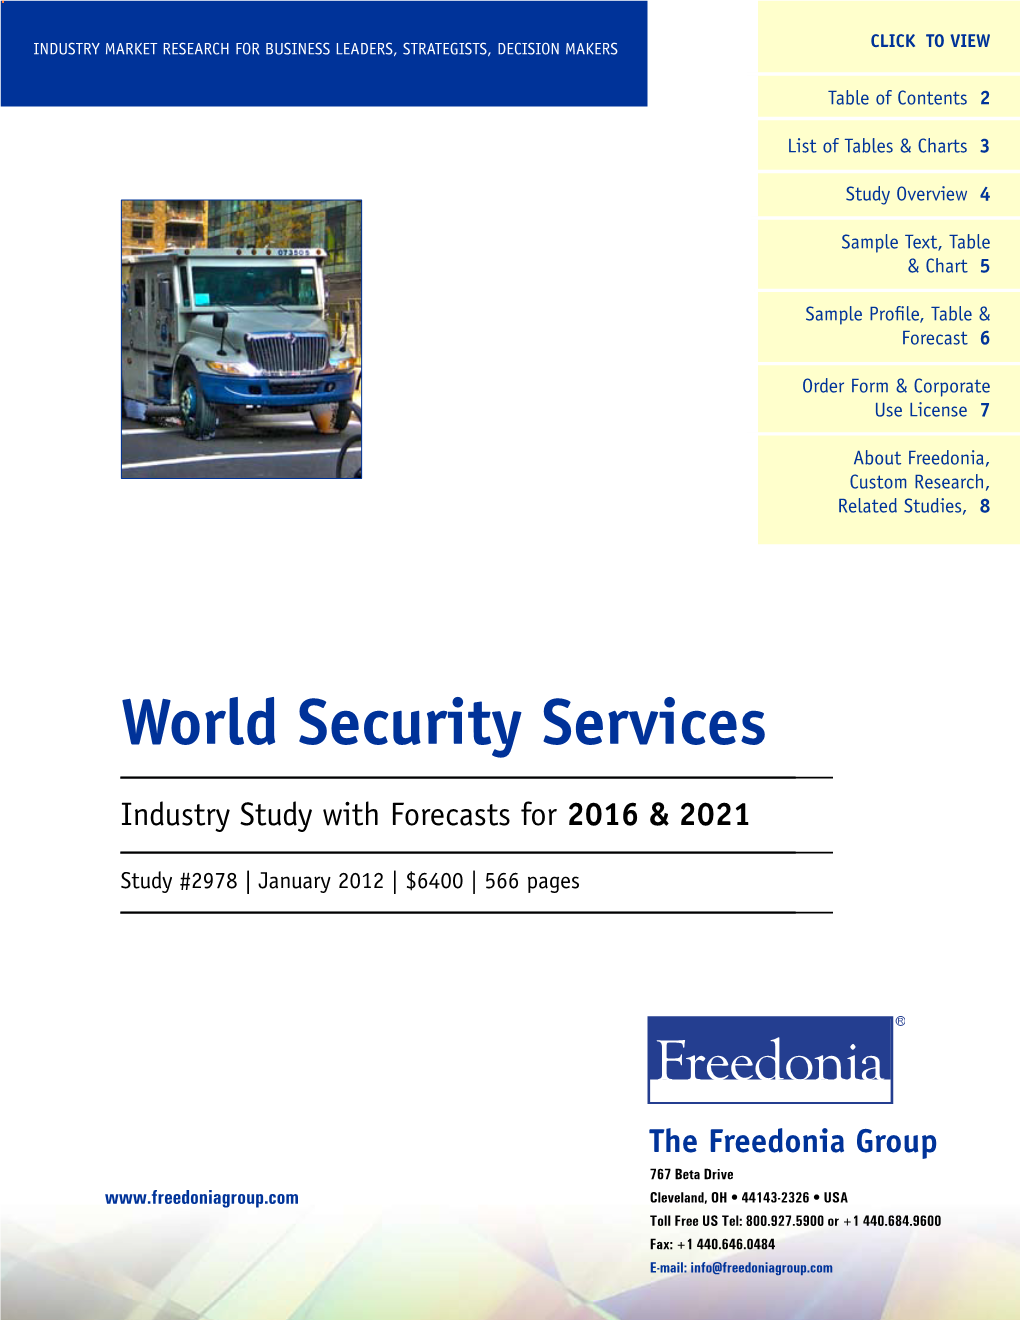 World Security Services